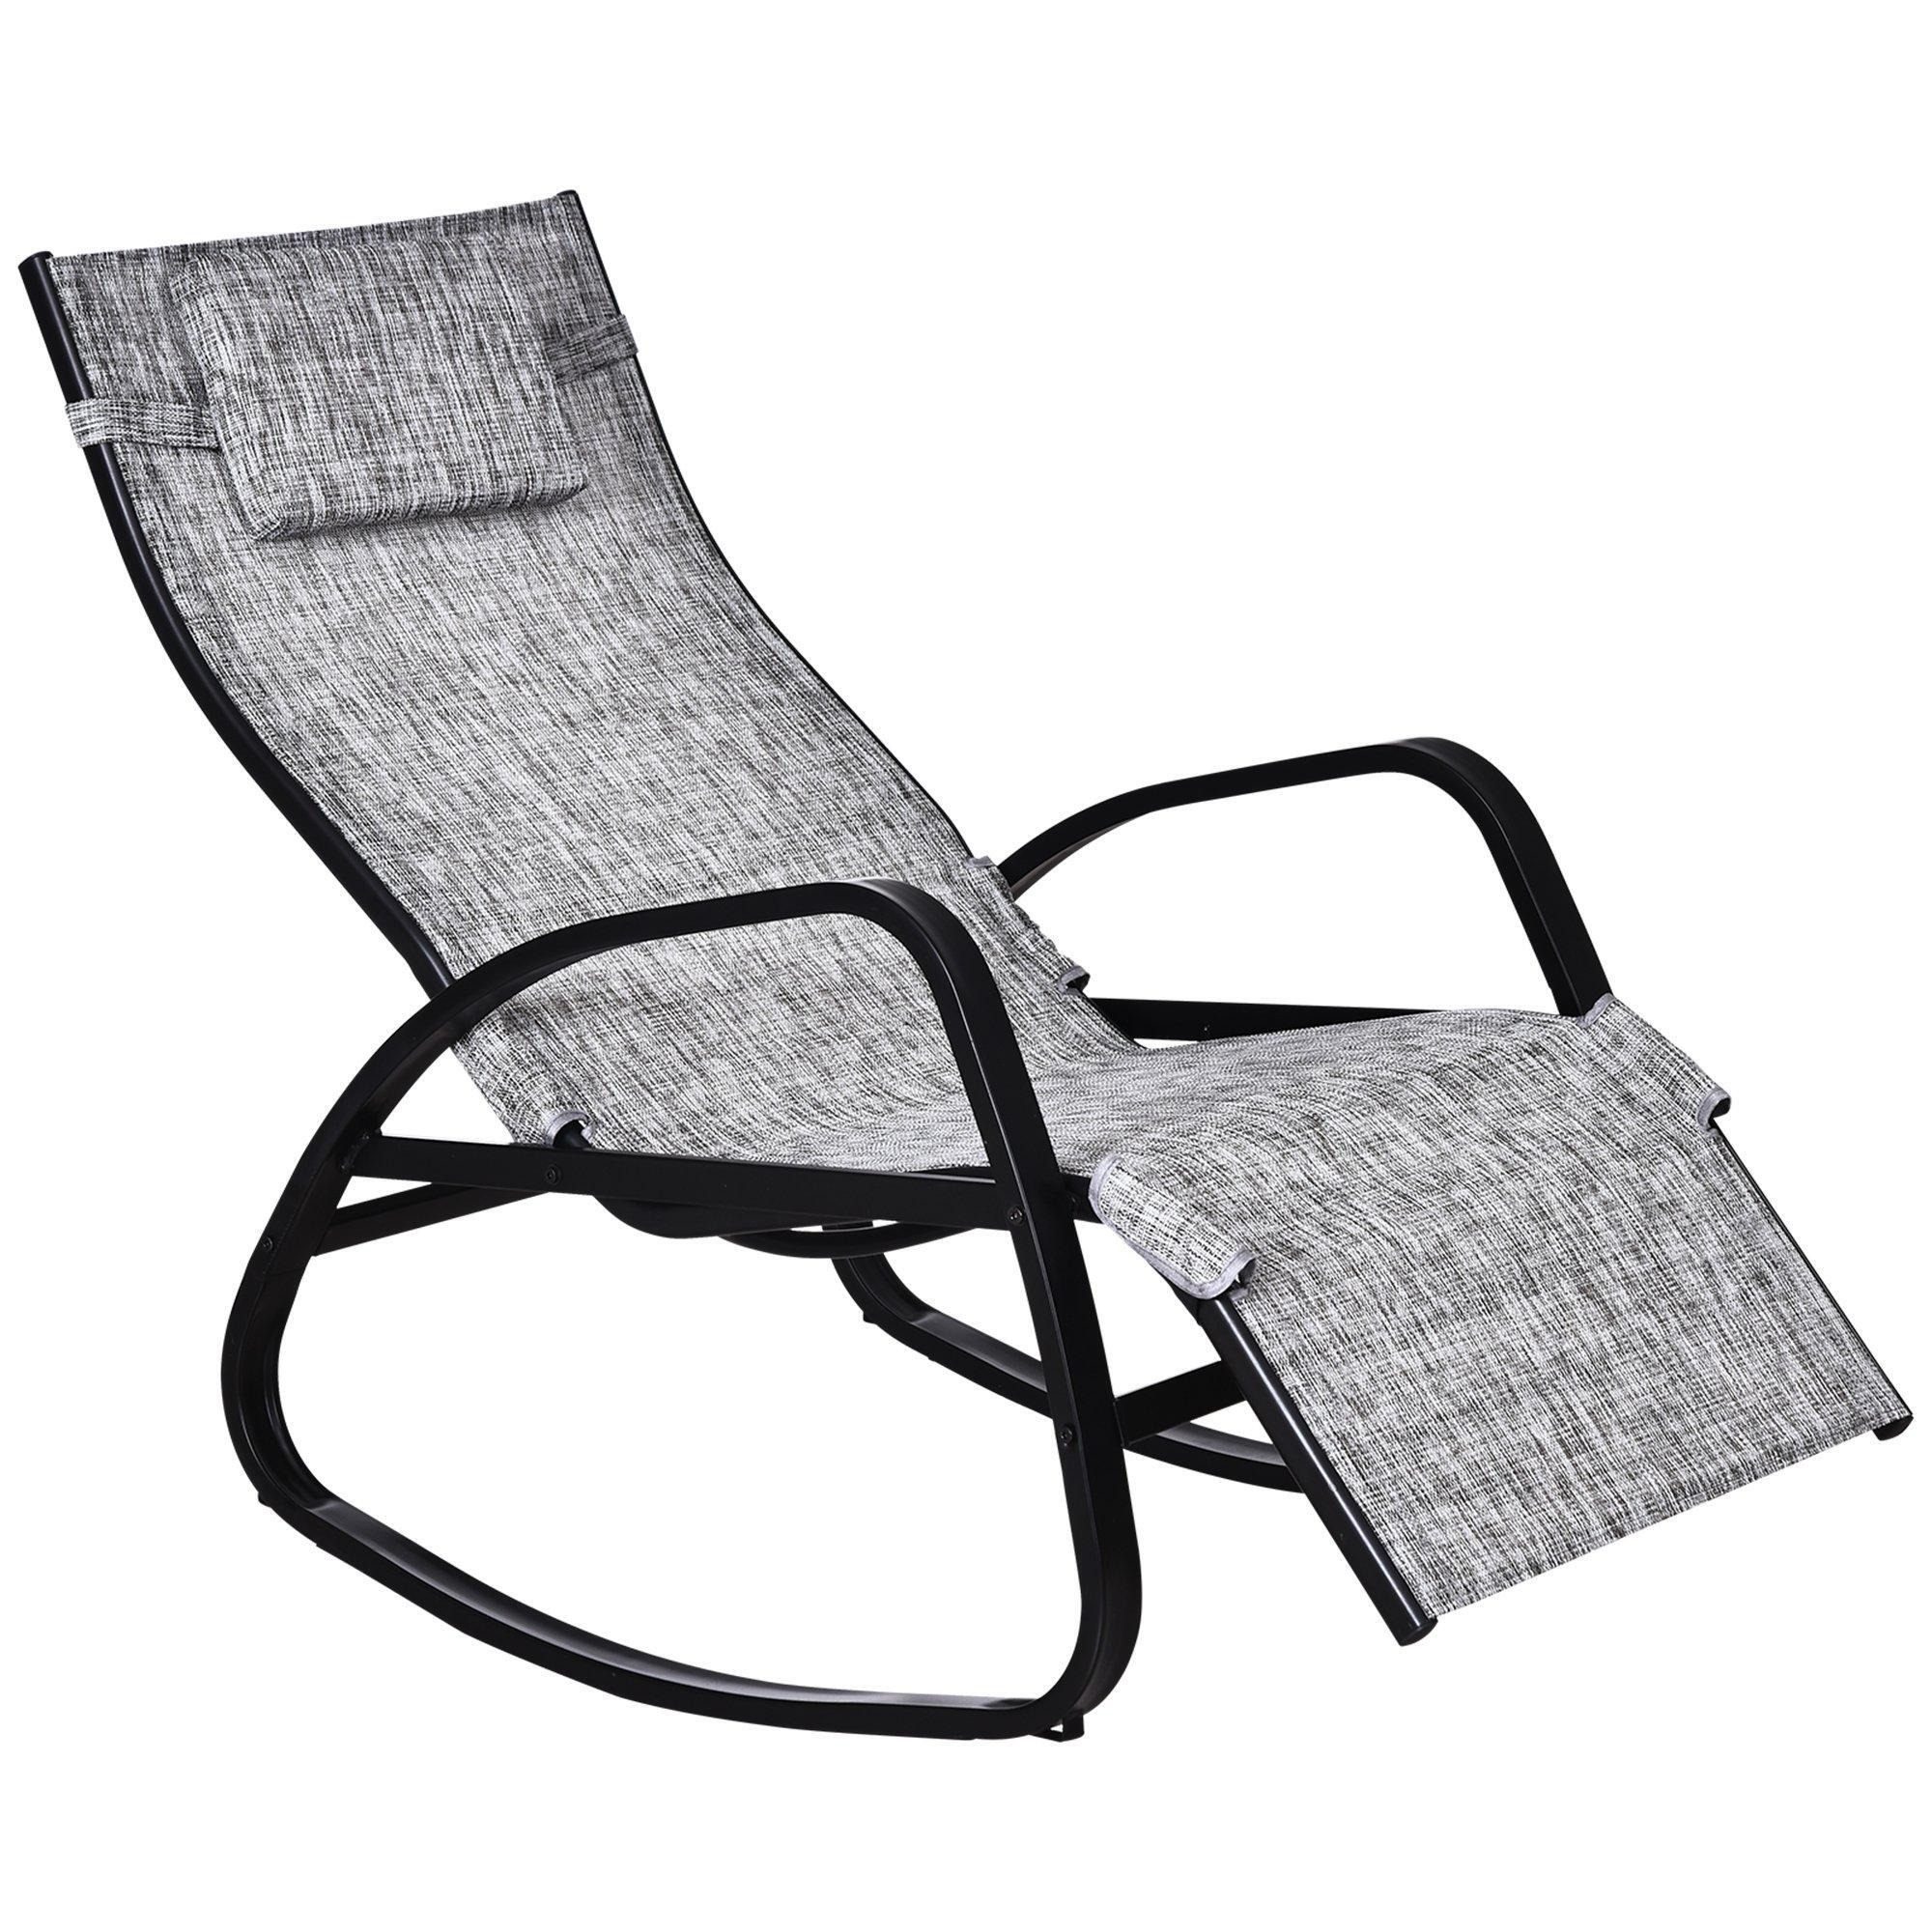 Patio Adjust Lounge Chair Rocker Outdoor with Pillow, Footrest - image 1